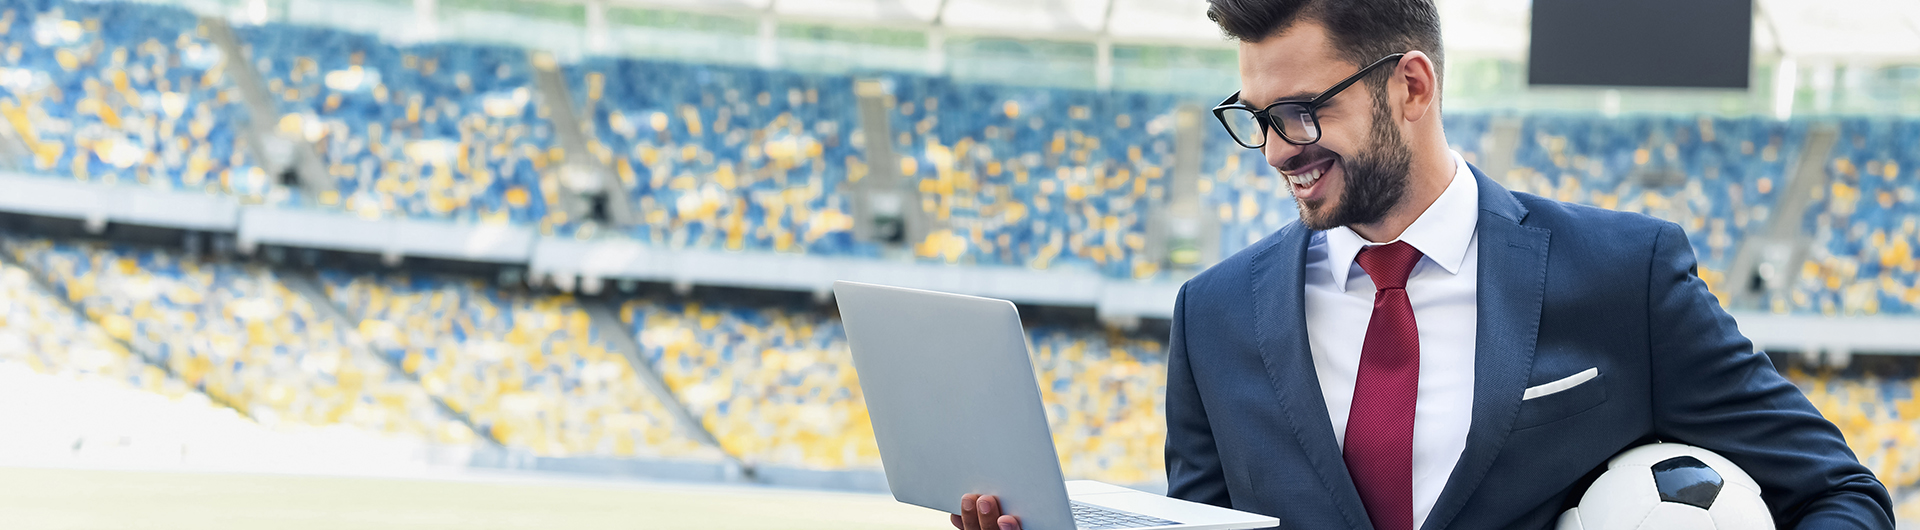 sports manager on field holding soccer ball and laptop